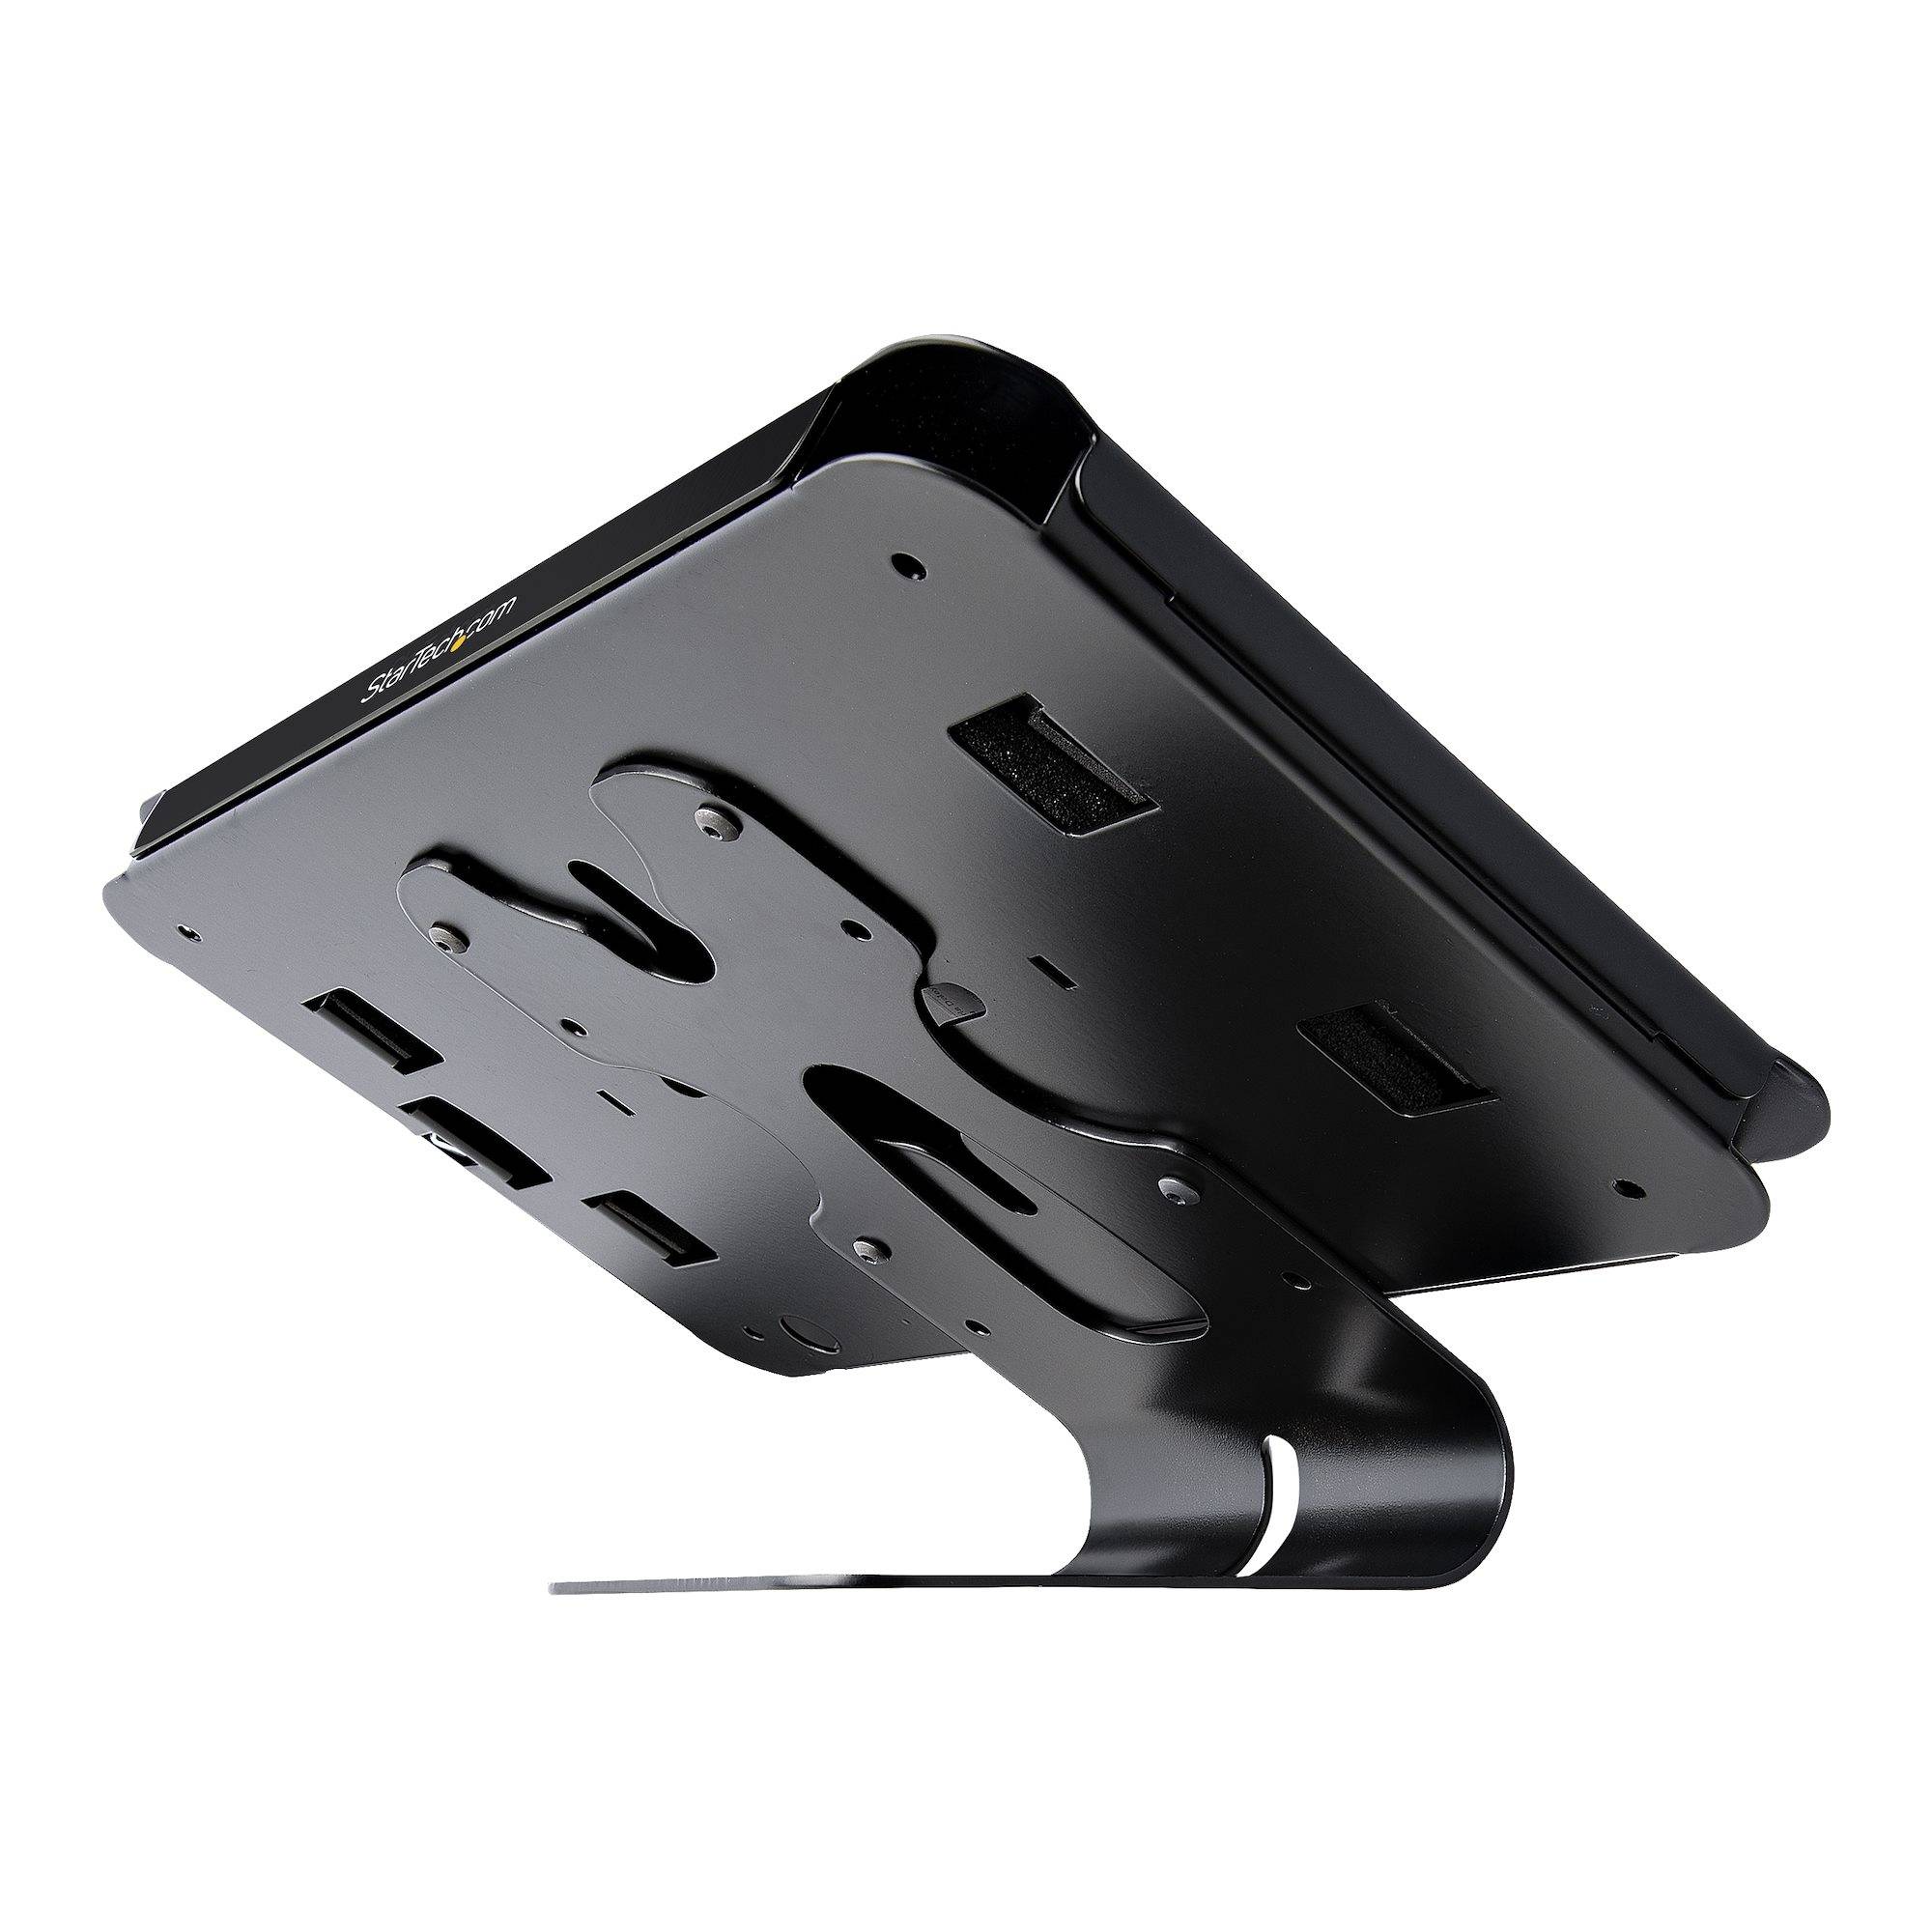 Rca Informatique - image du produit : SECURE TABLET STAND - IPAD OR OTHER TABLET 10.2IN / 10.5IN